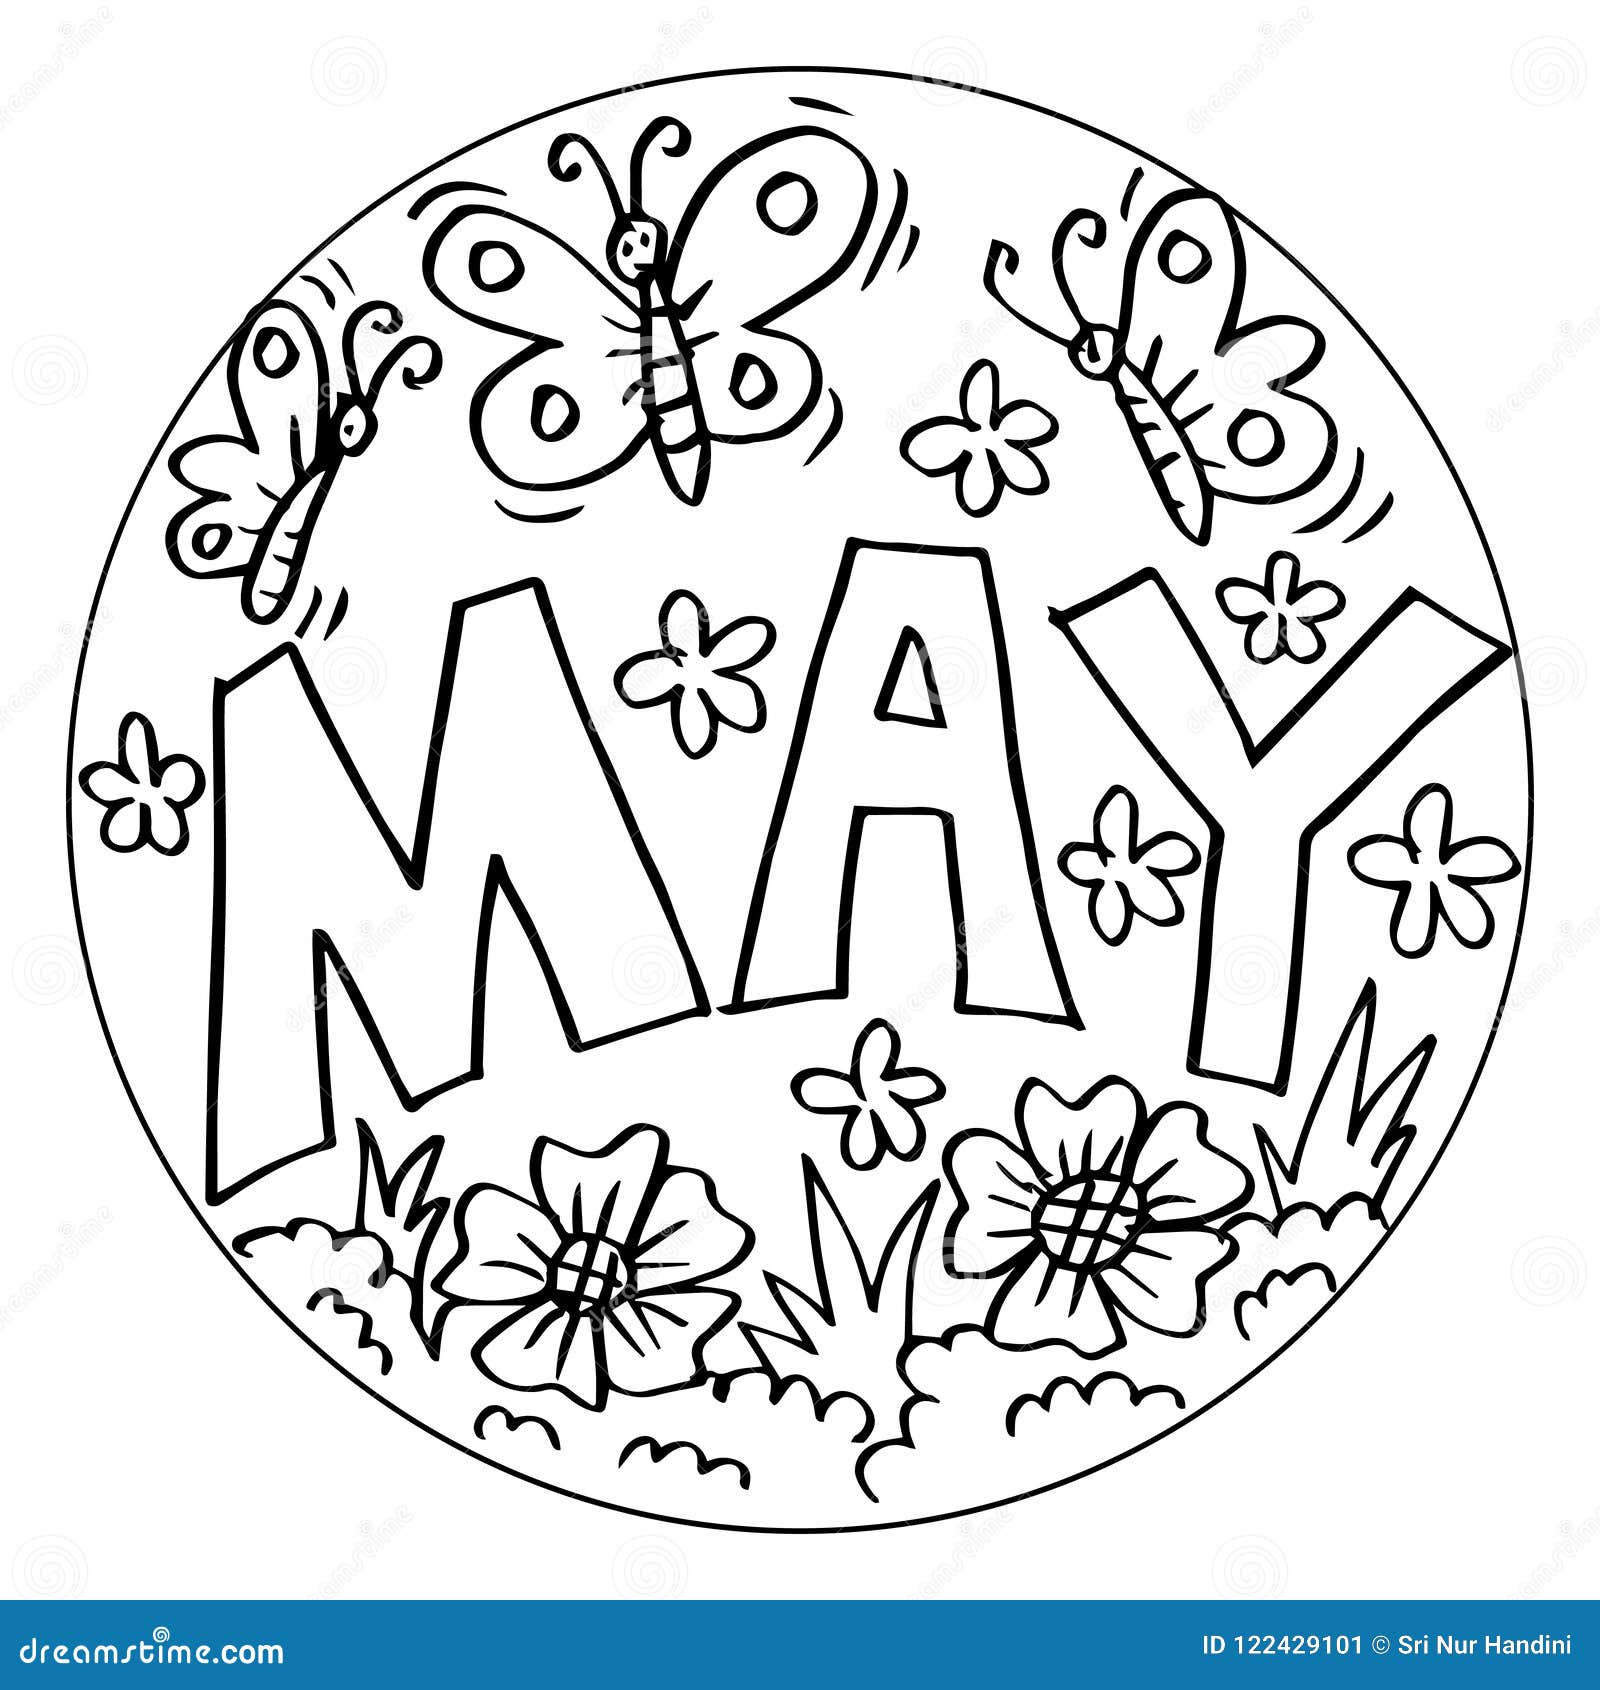 Flower Children Colouring Pages Stock Illustrations – 20 Flower ...